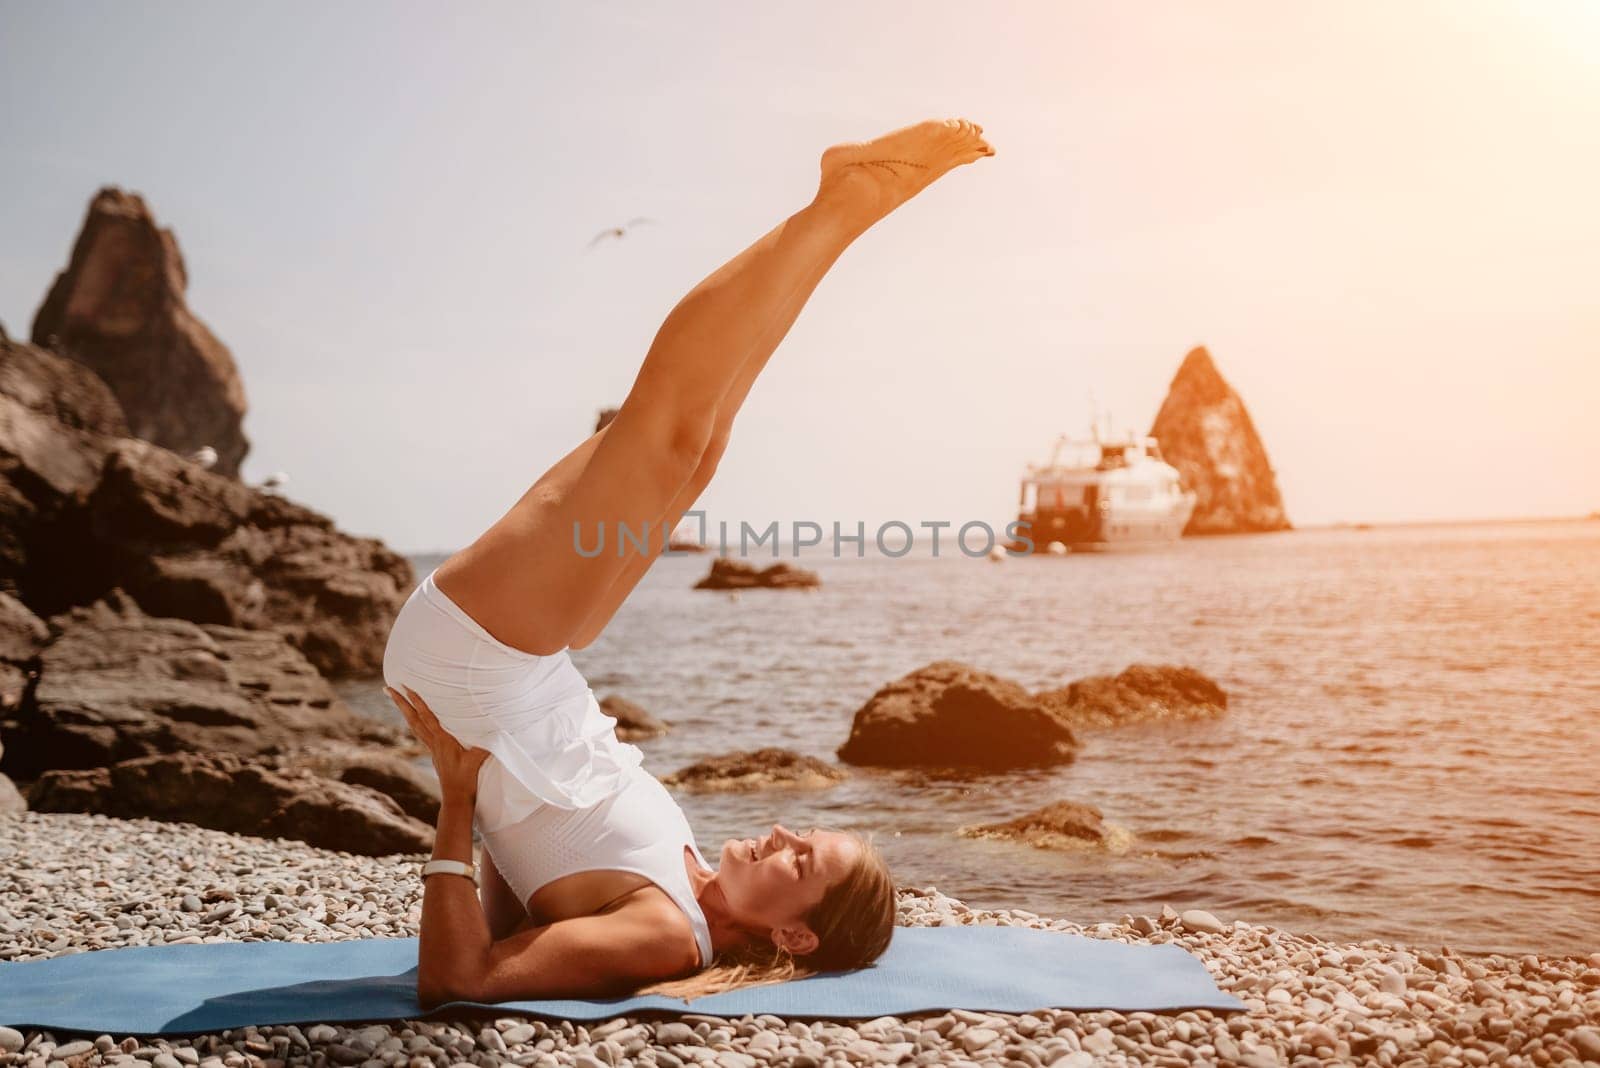 Woman sea yoga. Back view of free calm happy satisfied woman with long hair standing on top rock with yoga position against of sky by the sea. Healthy lifestyle outdoors in nature, fitness concept.